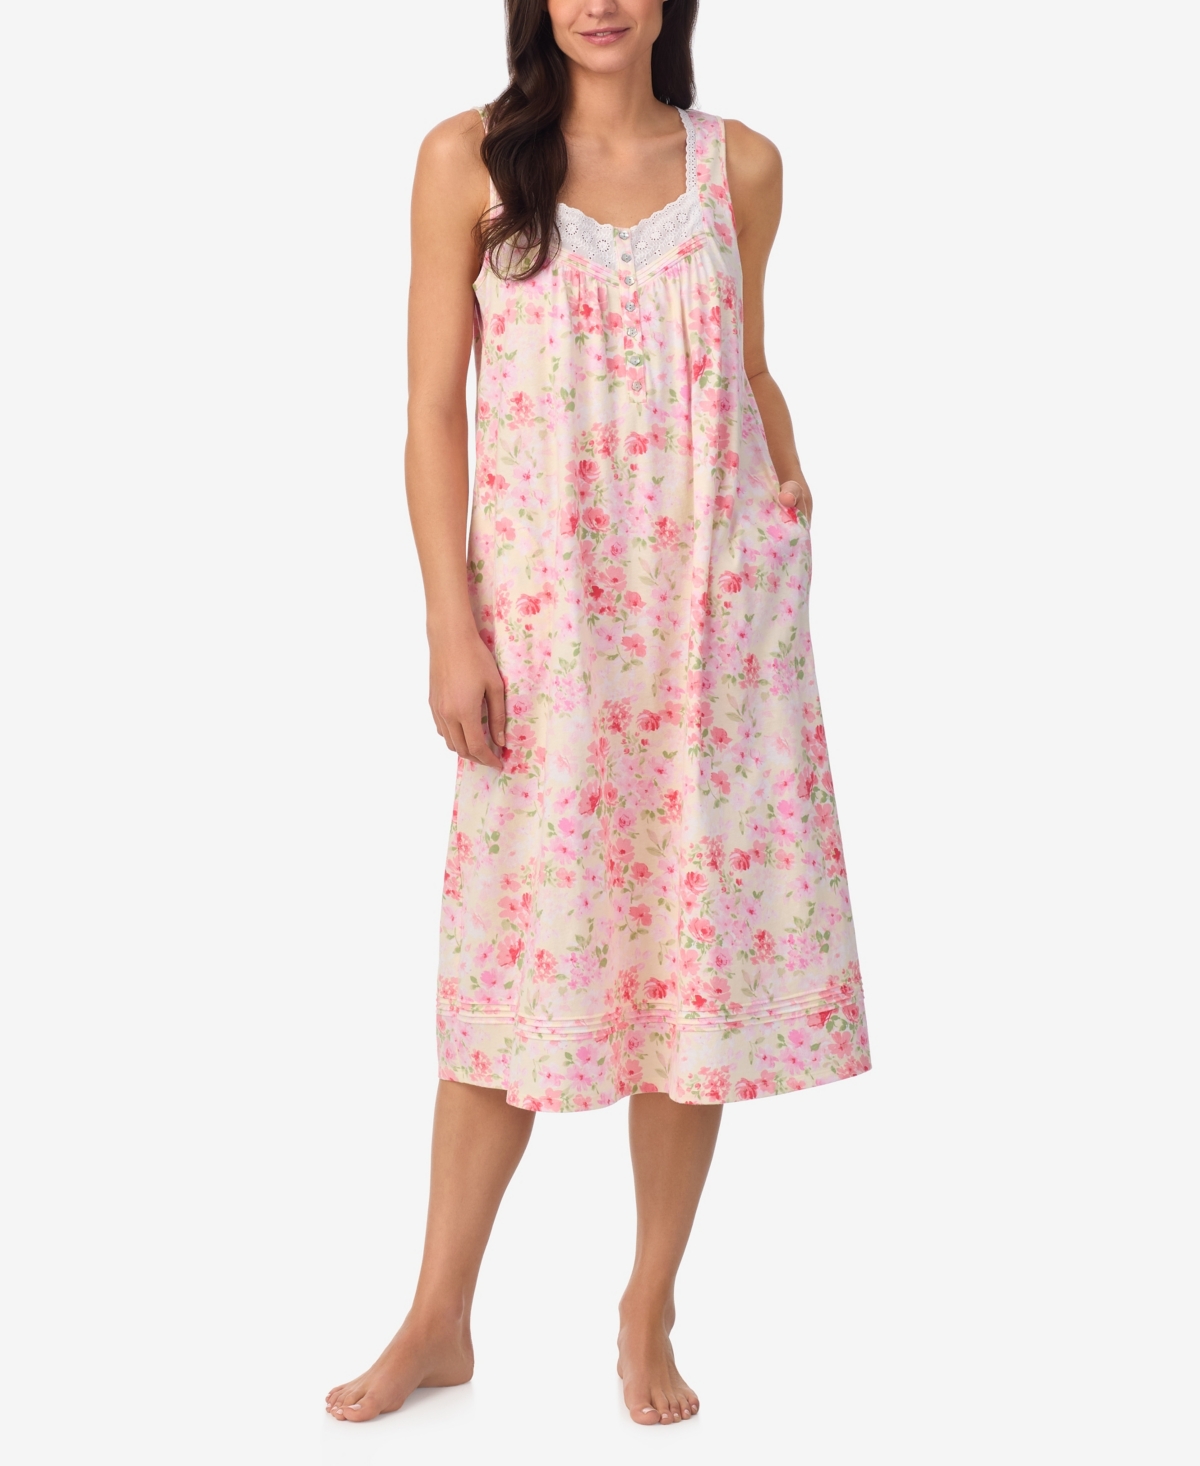 Women's Sleeveless Nightgown - Pink Floral